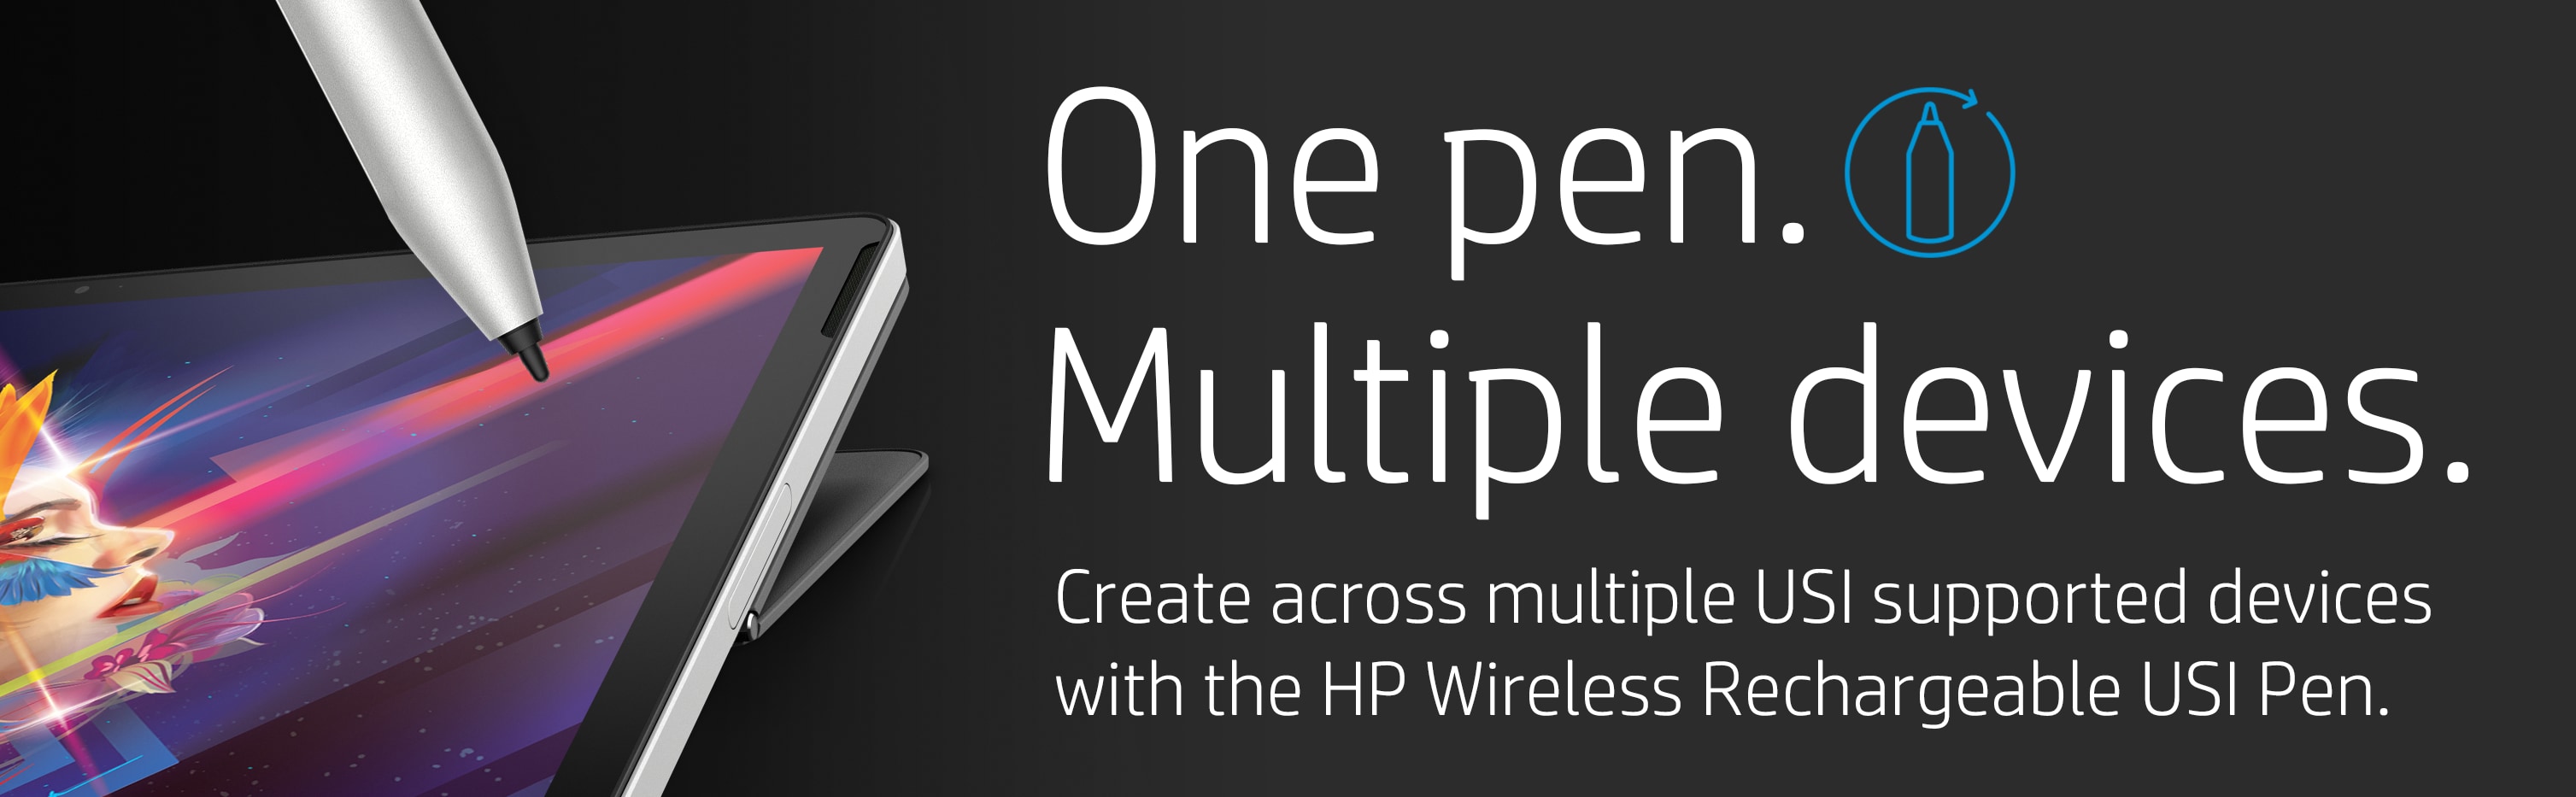 HP Pen Rechargeable Wireless USI